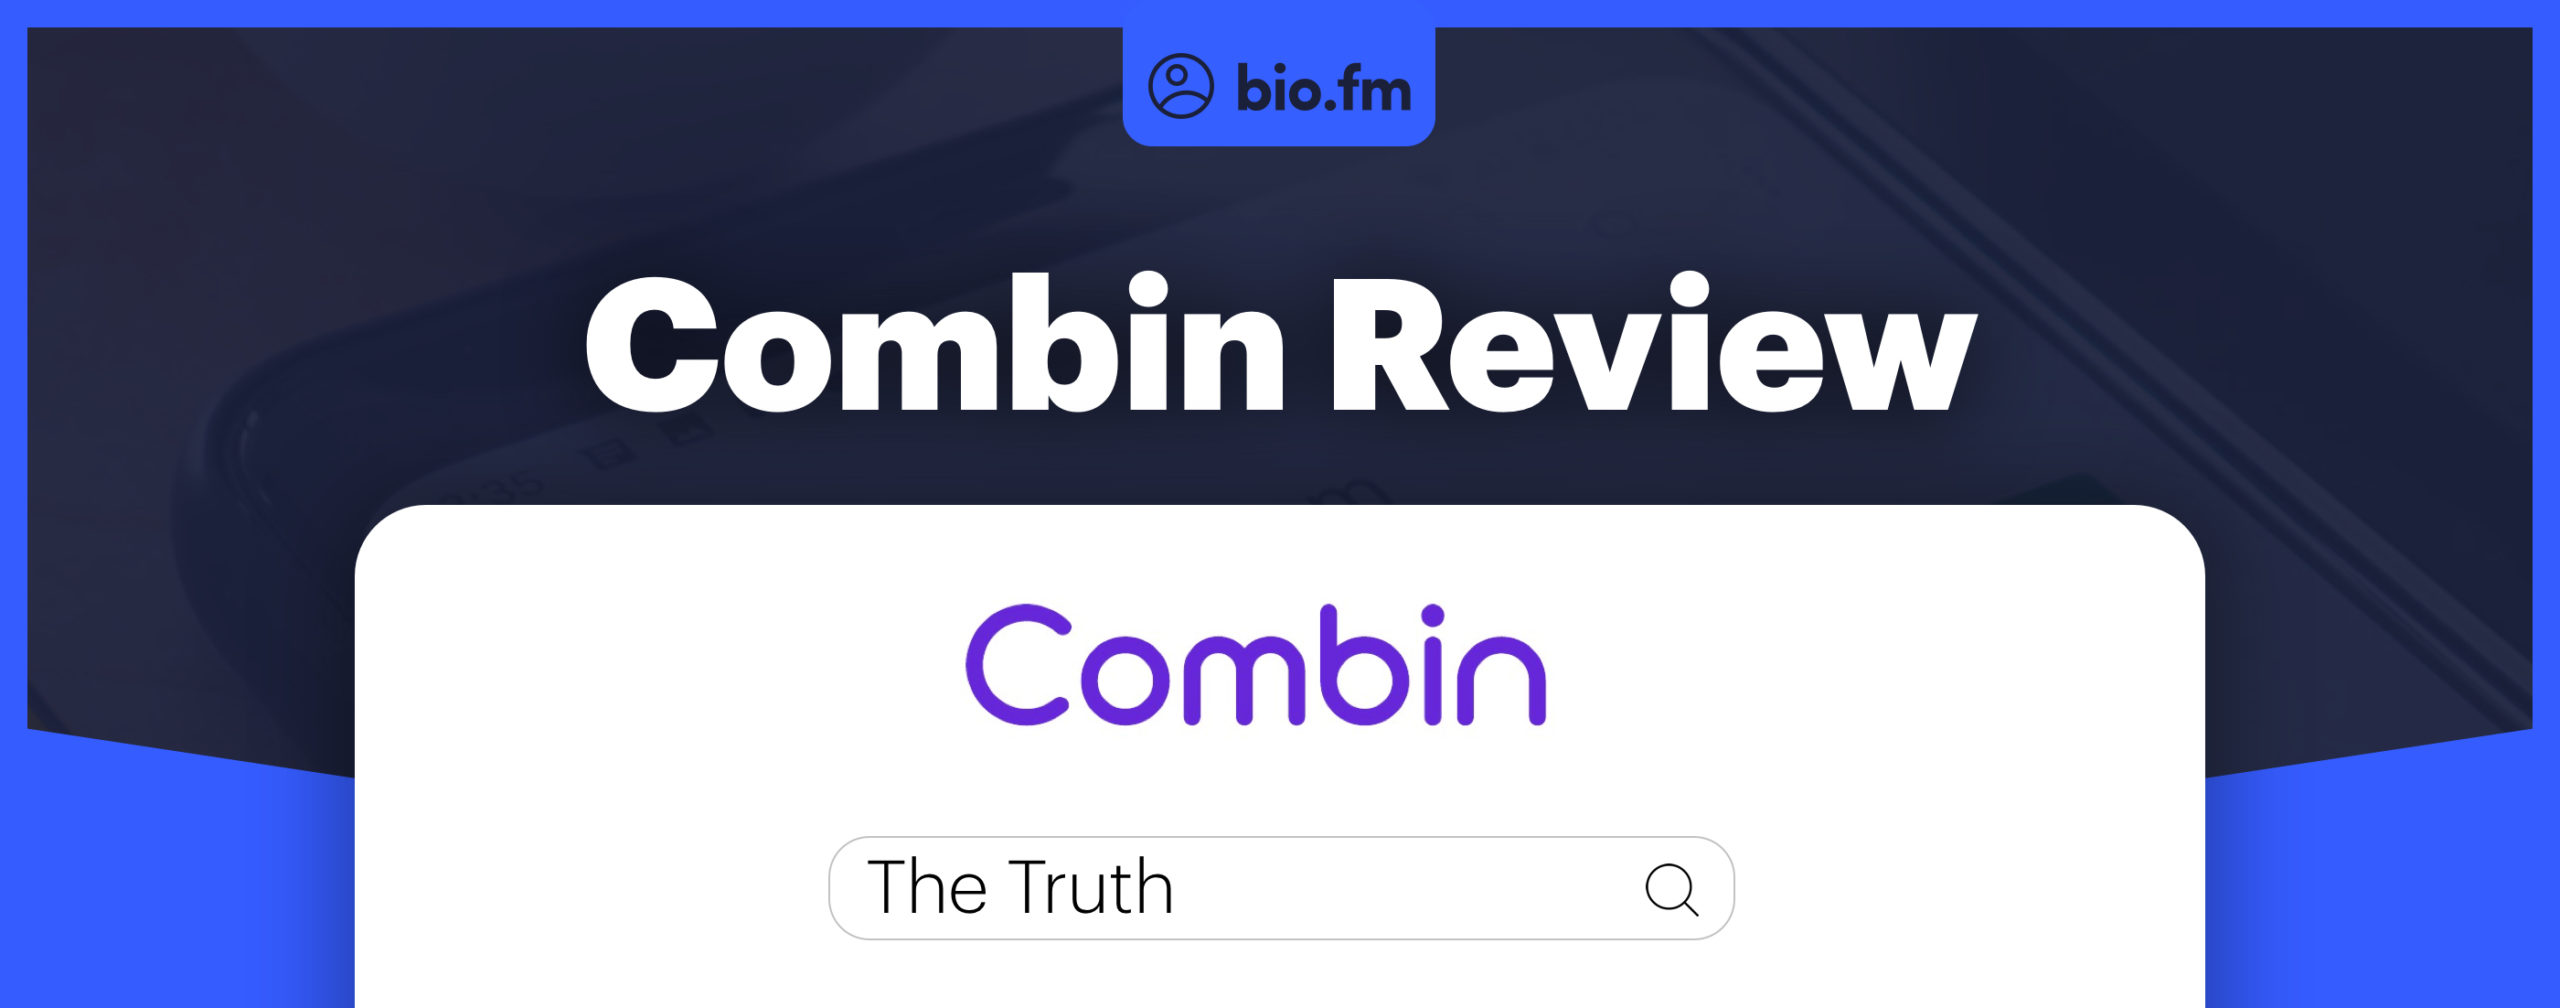 combin review featured image